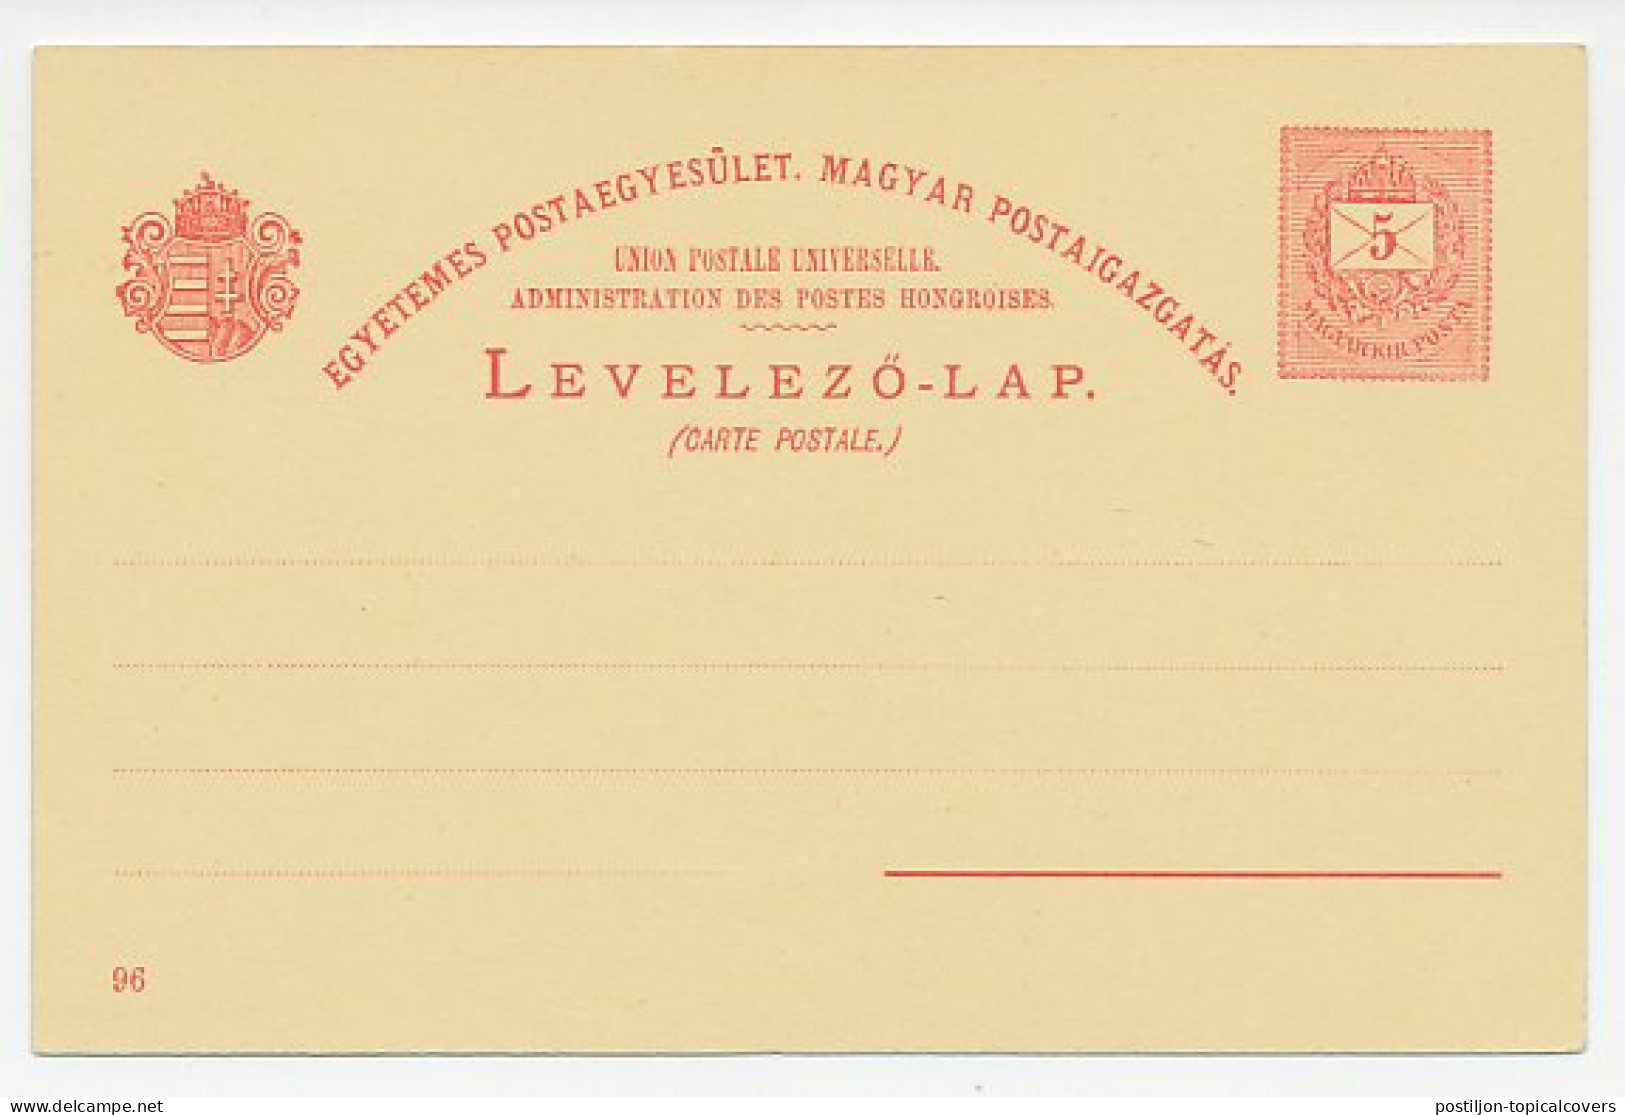 Postal Stationery Hungary Dance Of The Hussars - Music - Violin - Tanz